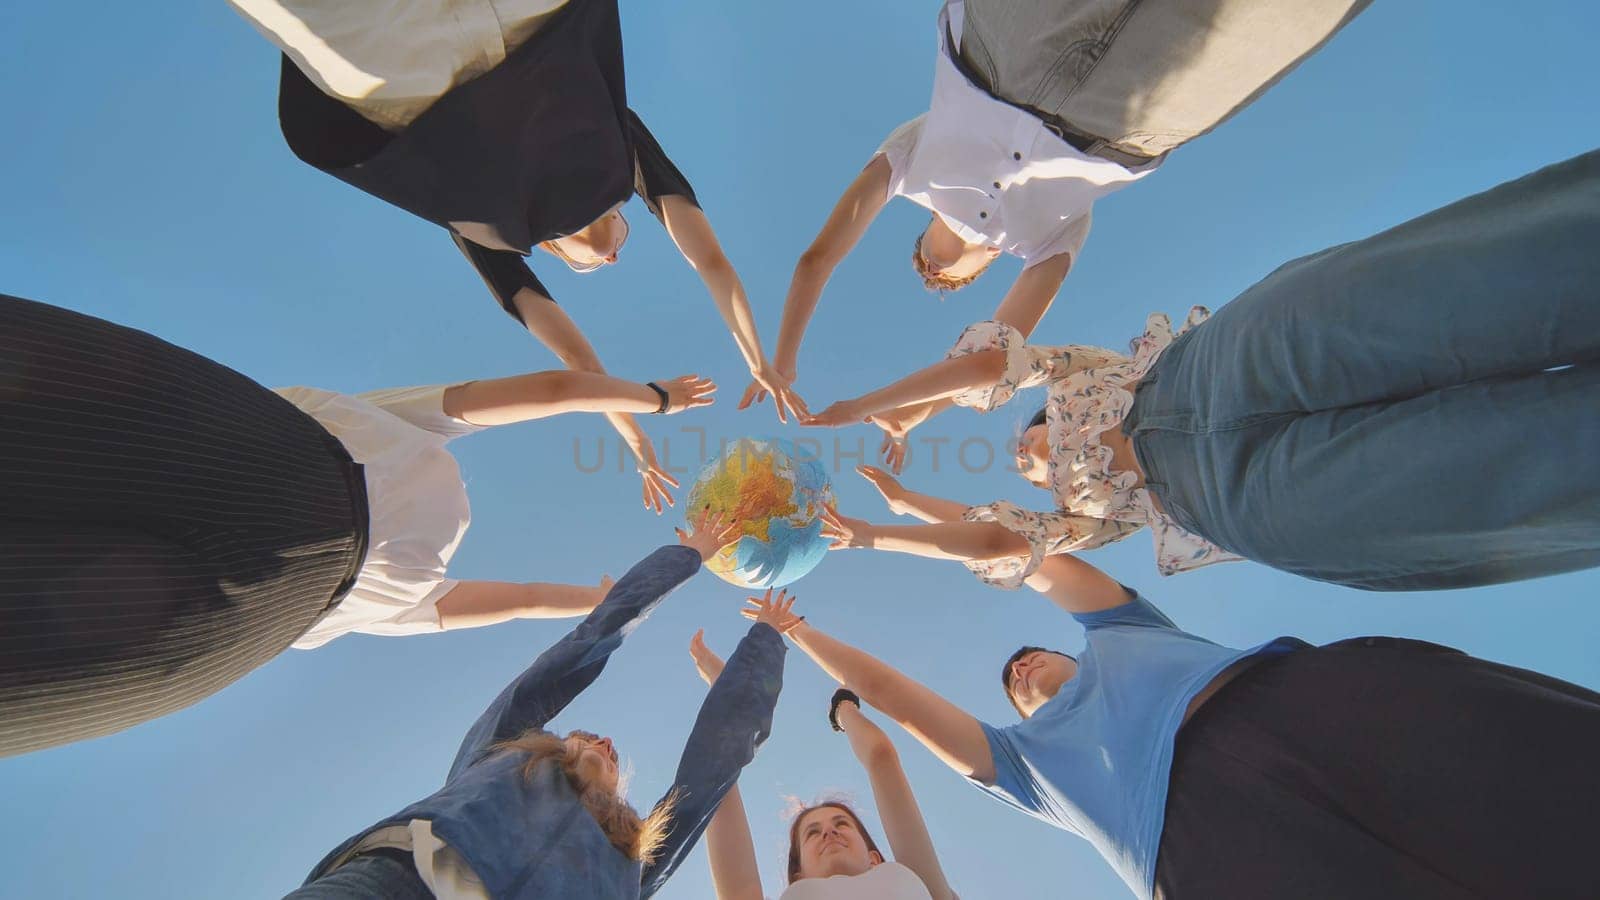 Friends hold and toss a geographic globe in their hands. The concept of keeping the world safe